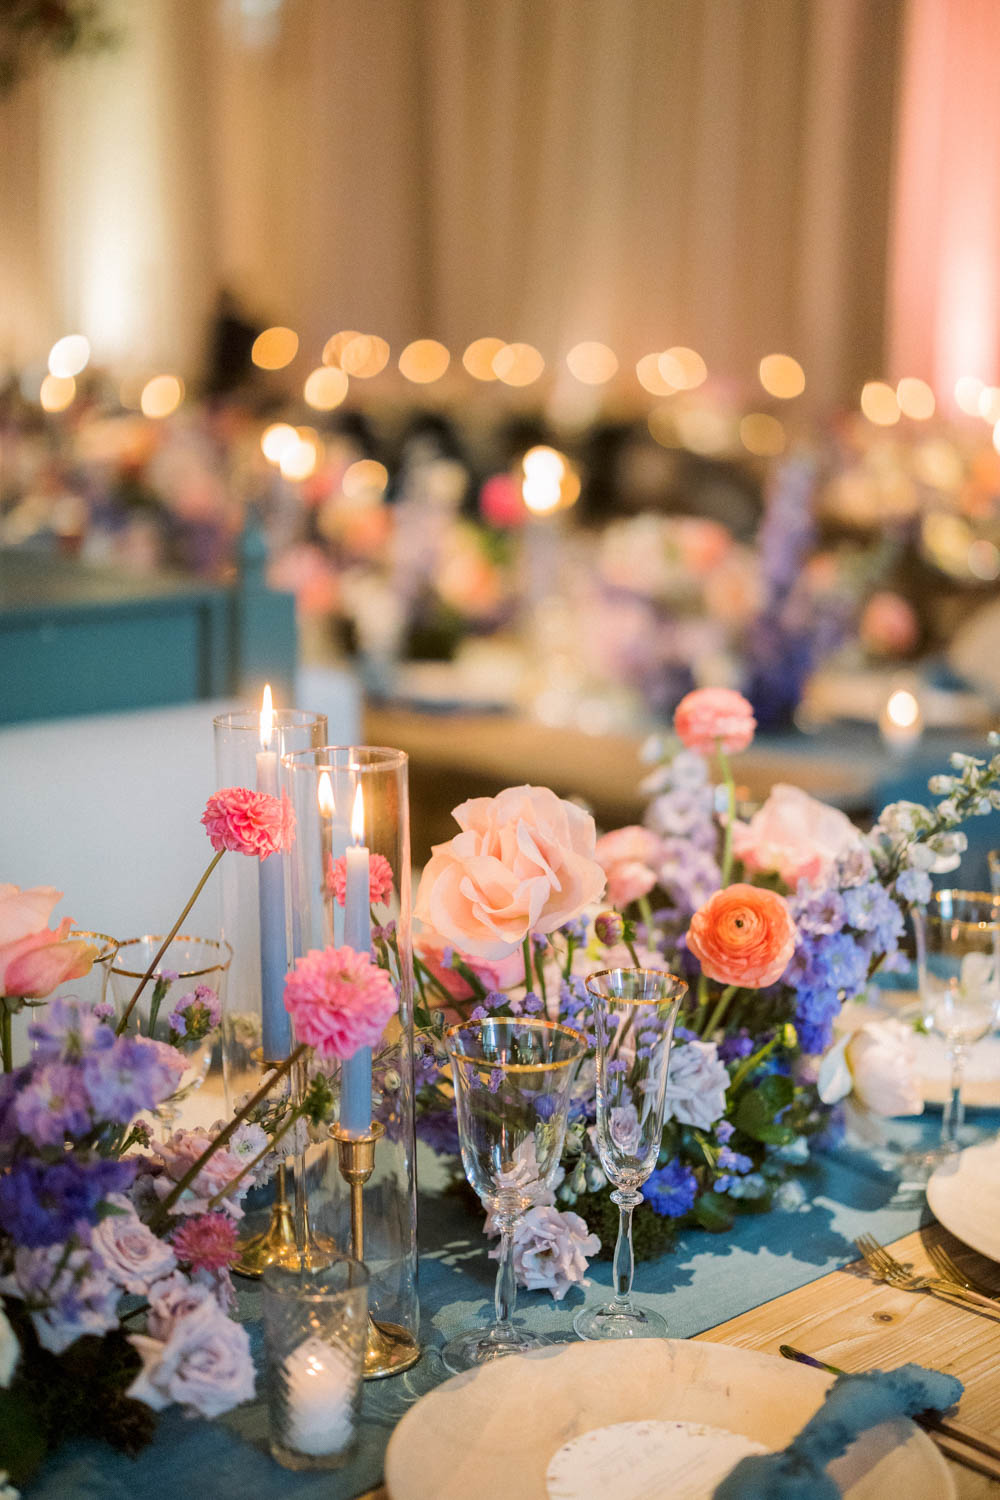 Colorful floral arrangements and candlelight at a wedding hosted at the Peninsula in Chicago.